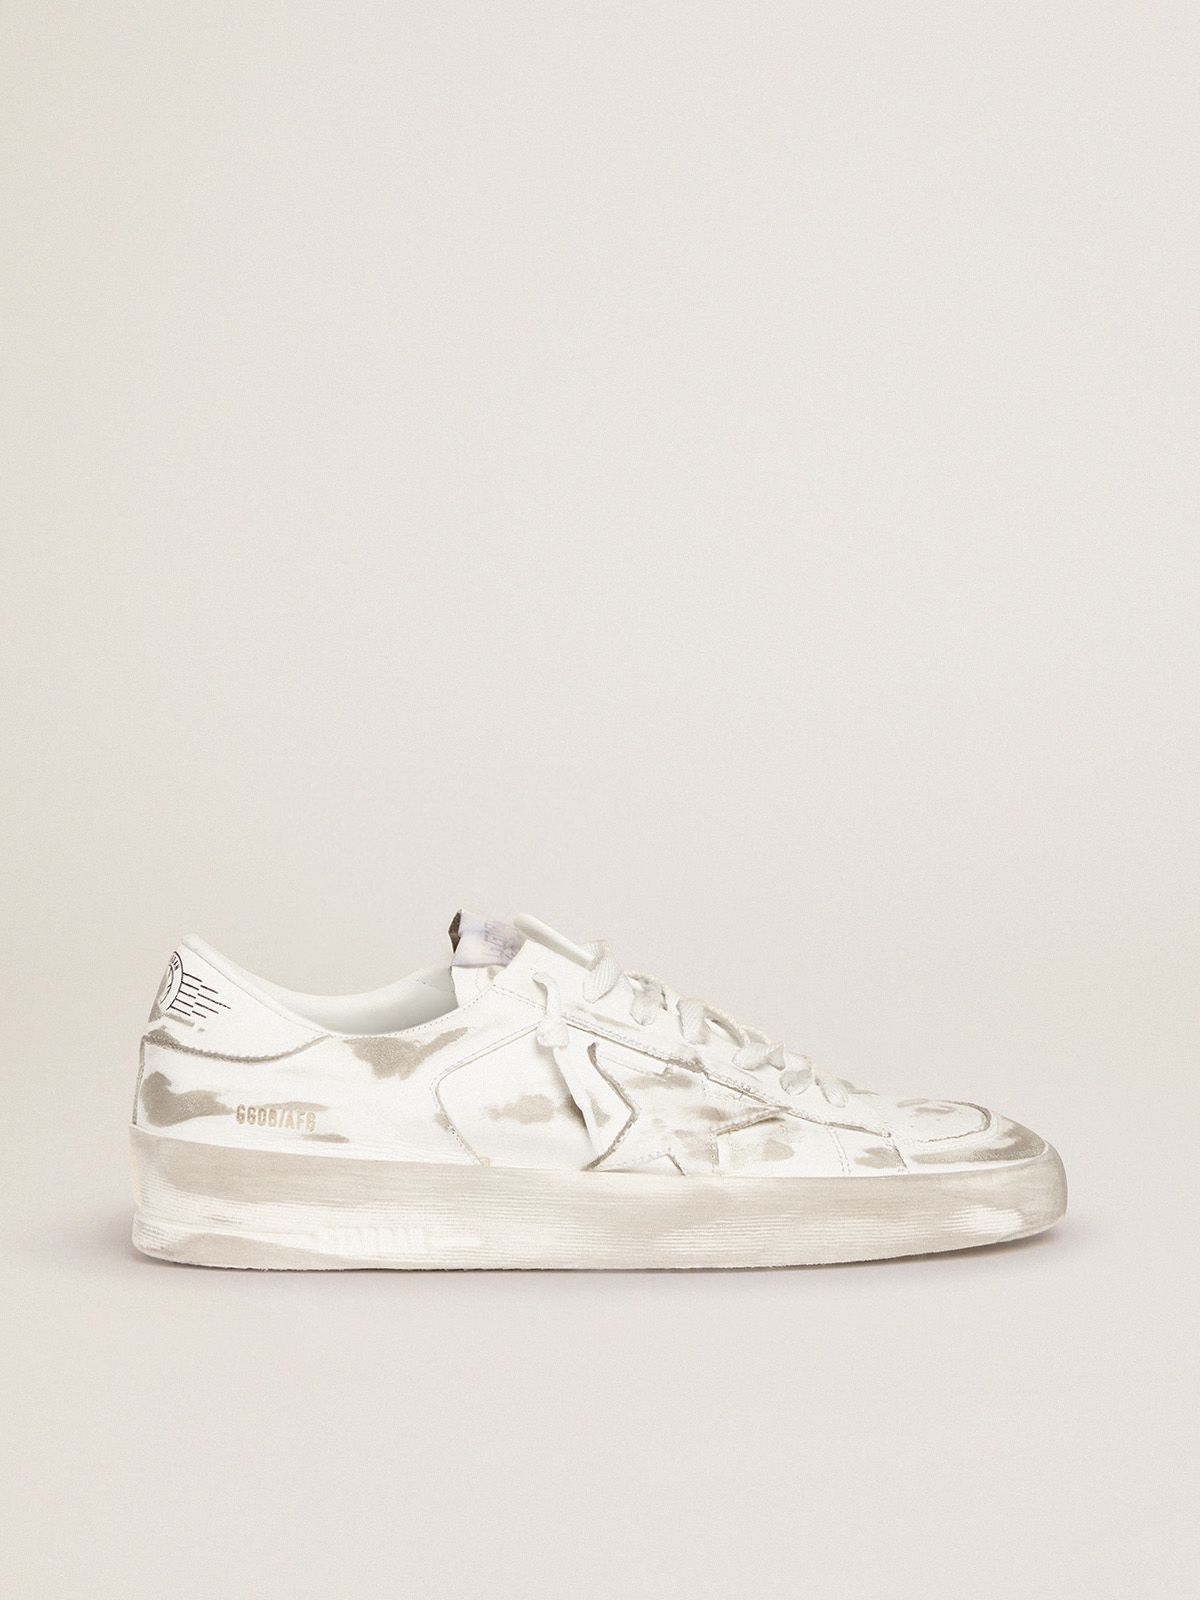 golden goose leather lived-in treatment white sneakers in Stardan with